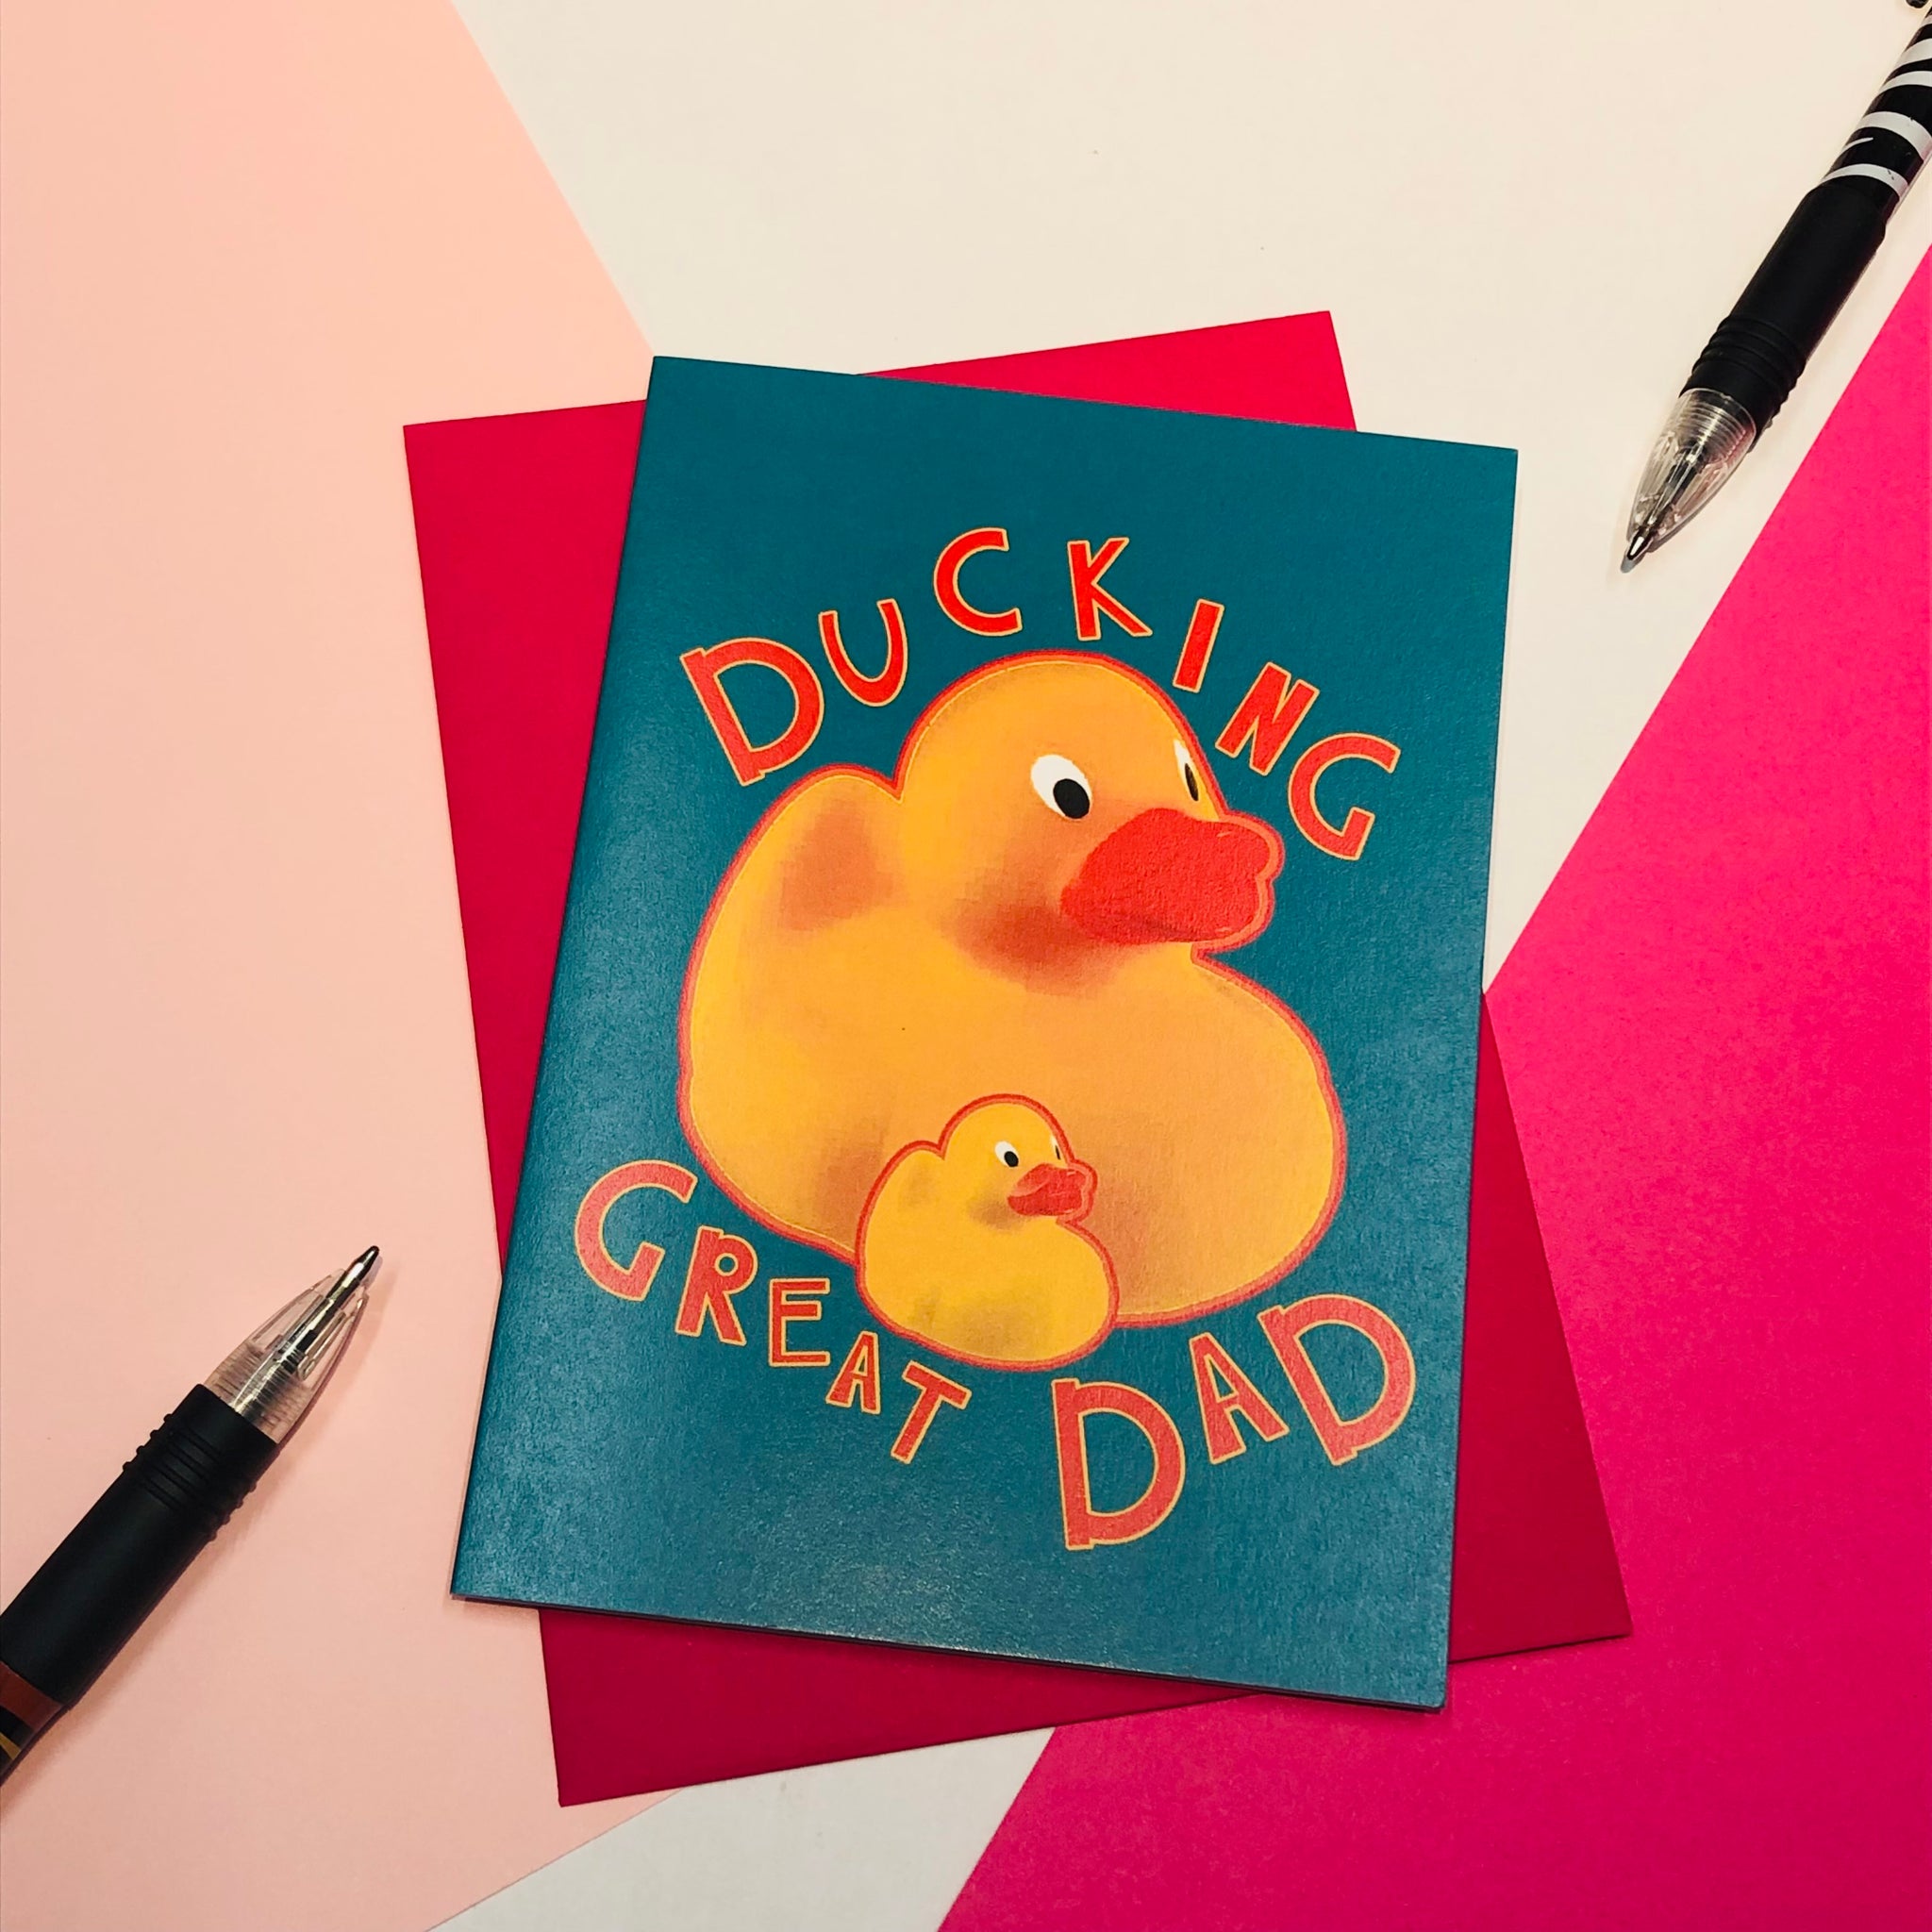 Ducking Great Dad Greetings Card